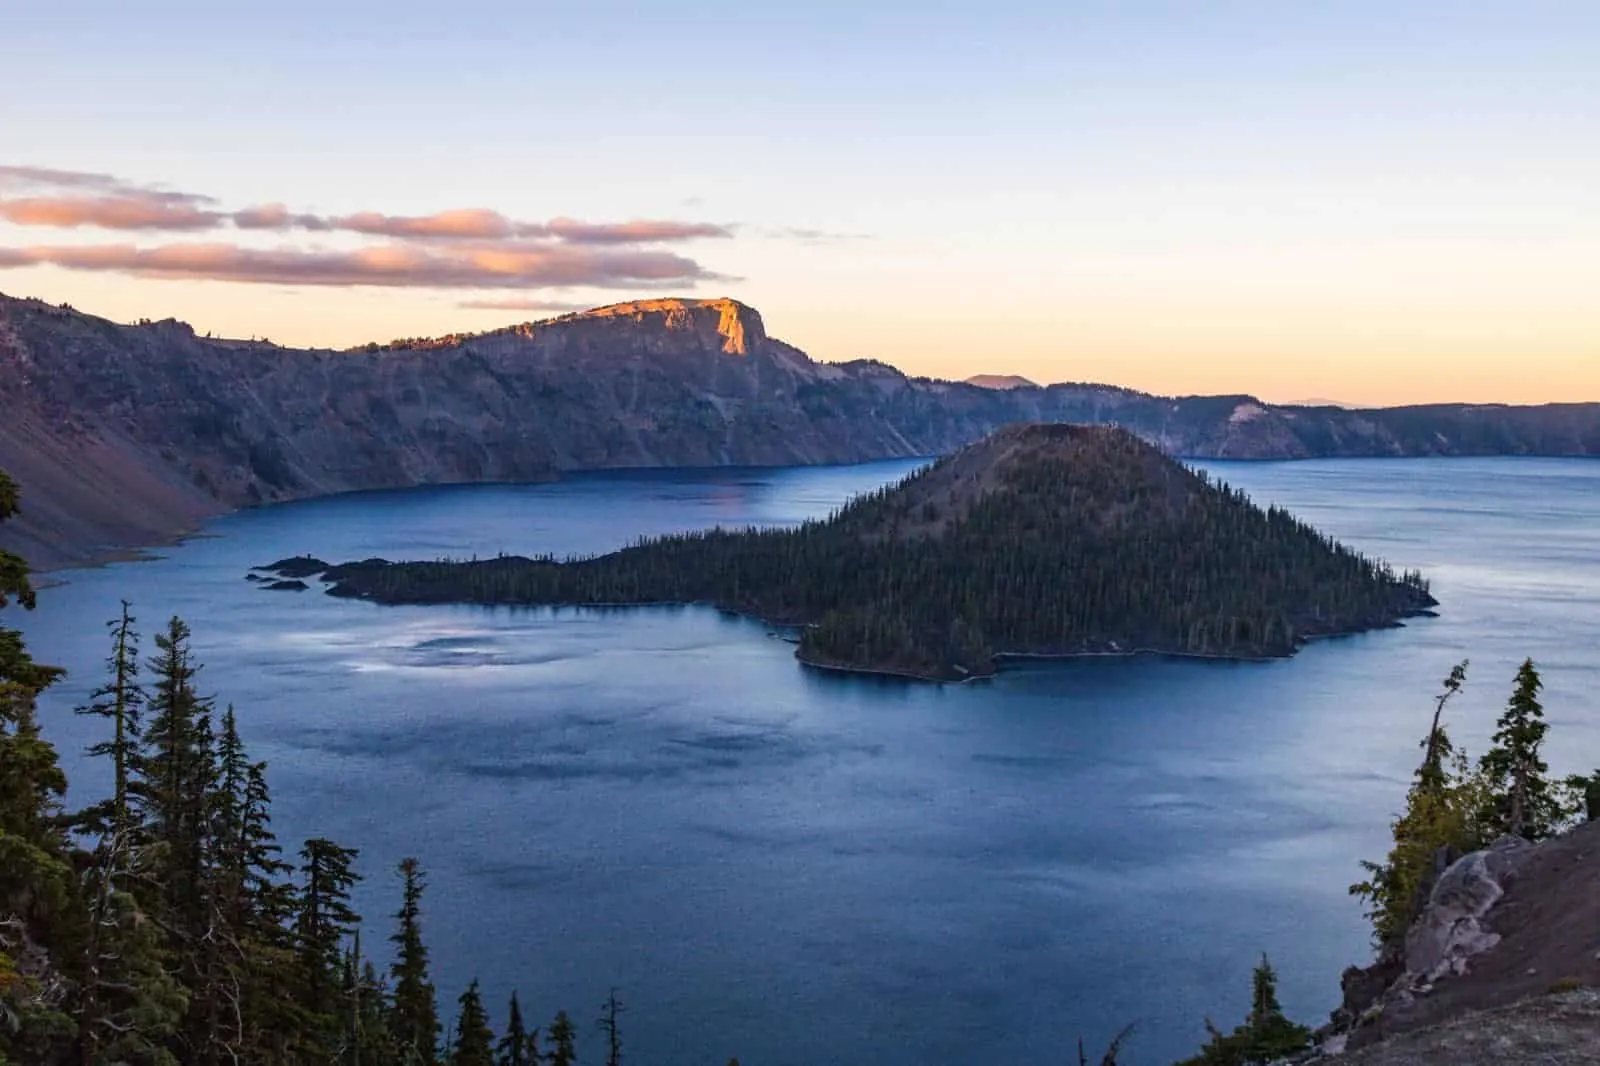 Volcanic Legacy Scenic Byway is a scenic American road trip that runs through California and Oregon.